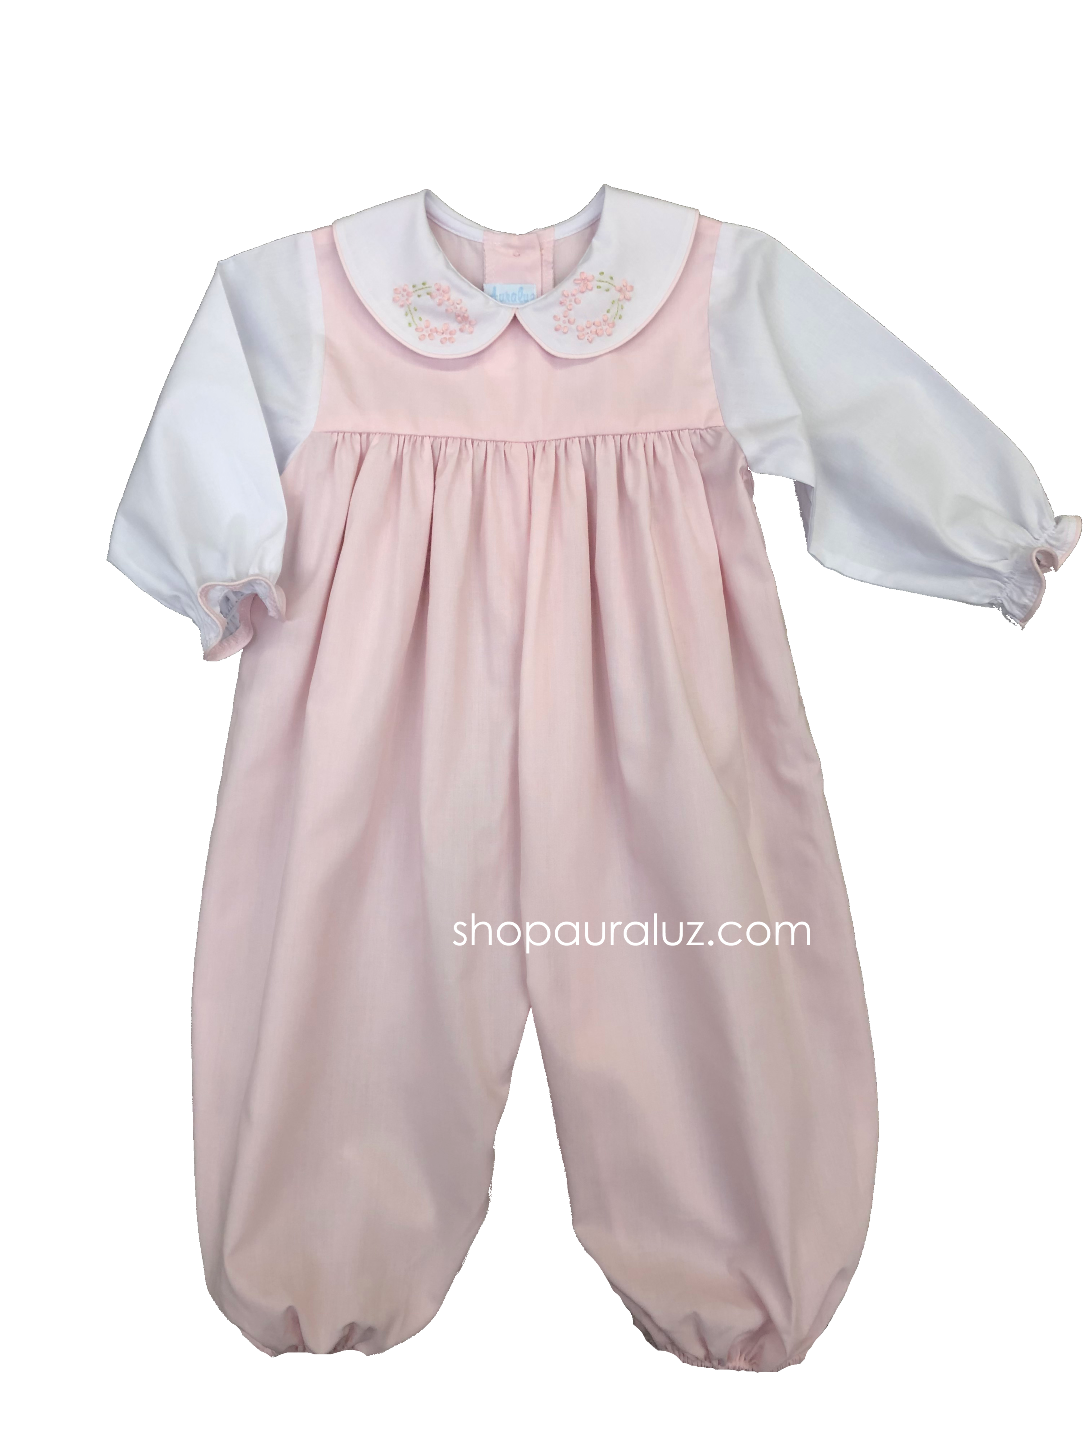 Auraluz Girl Longall...Pink w/white long sleeves and p.p. collar with embroidered flowers